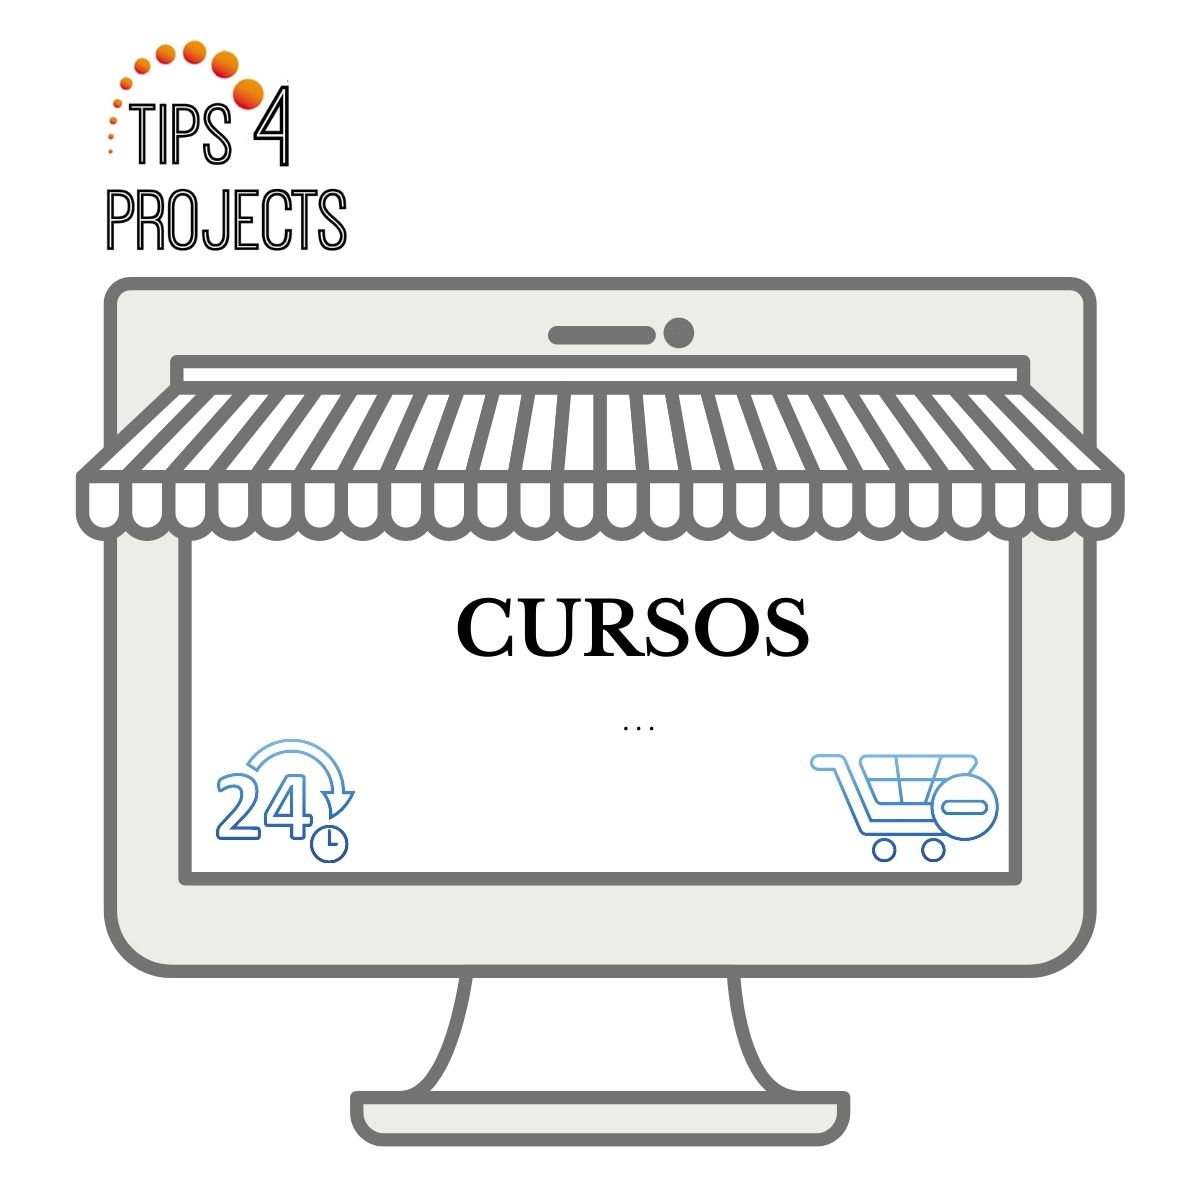 Tips4projects- cursos